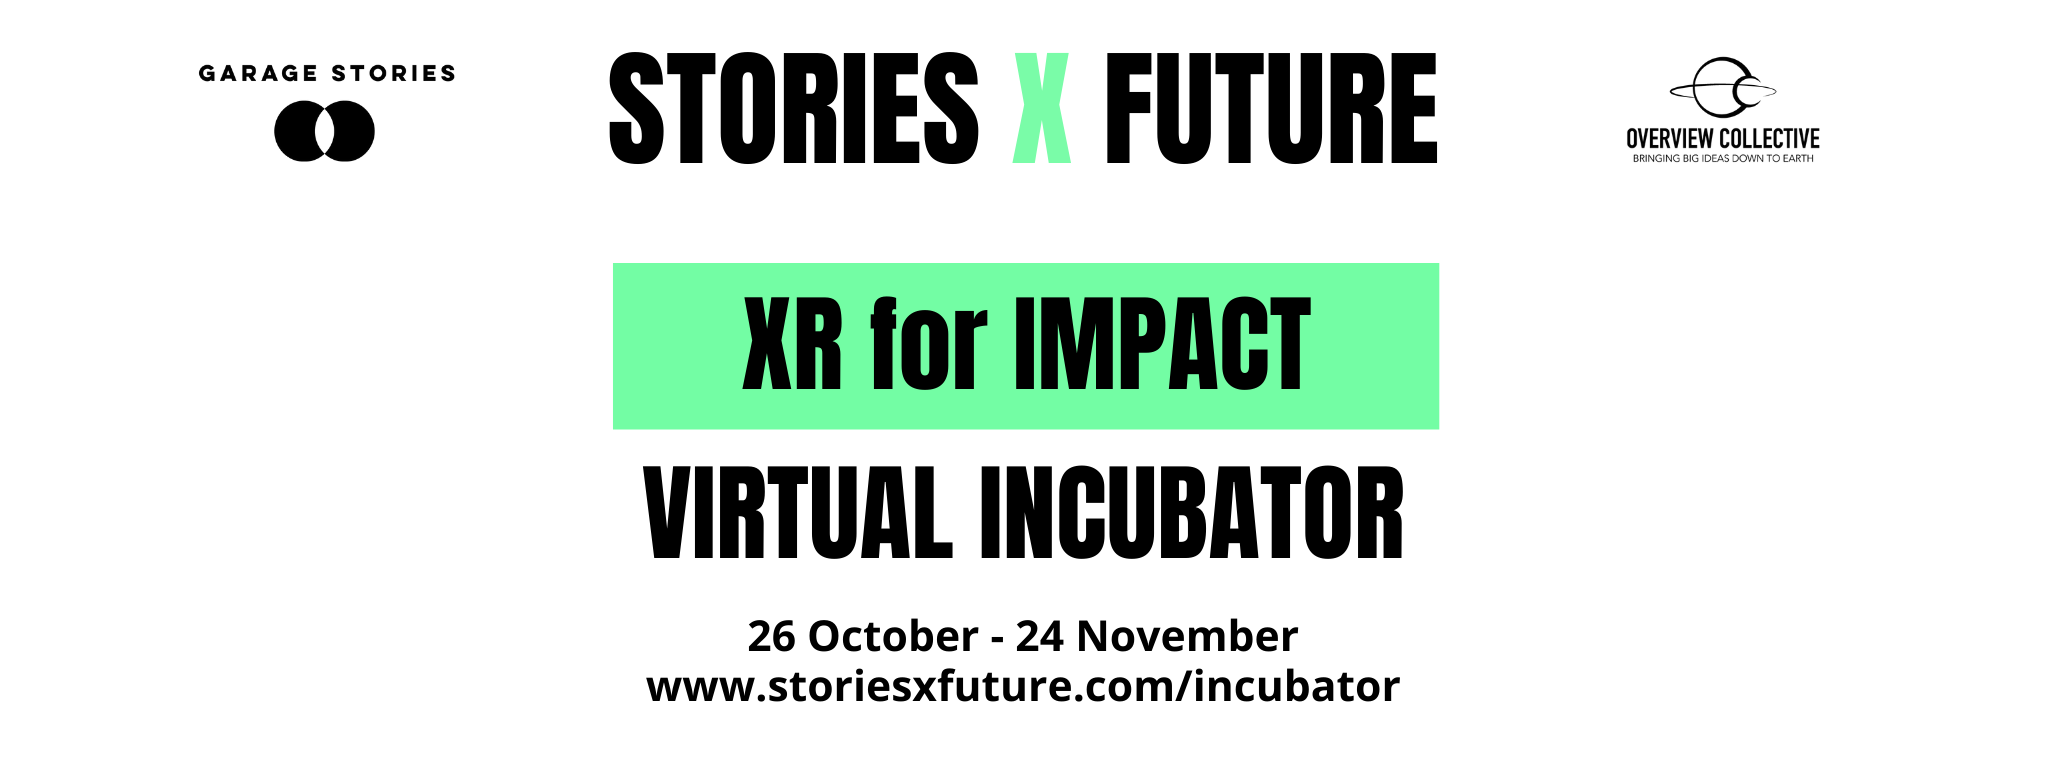 Garage Stories and Overview Collective are launching their first virtual incubator, “StoriesXFuture” to help creators develop their XR Projects (VR/AR/AI/5G) for Impact.